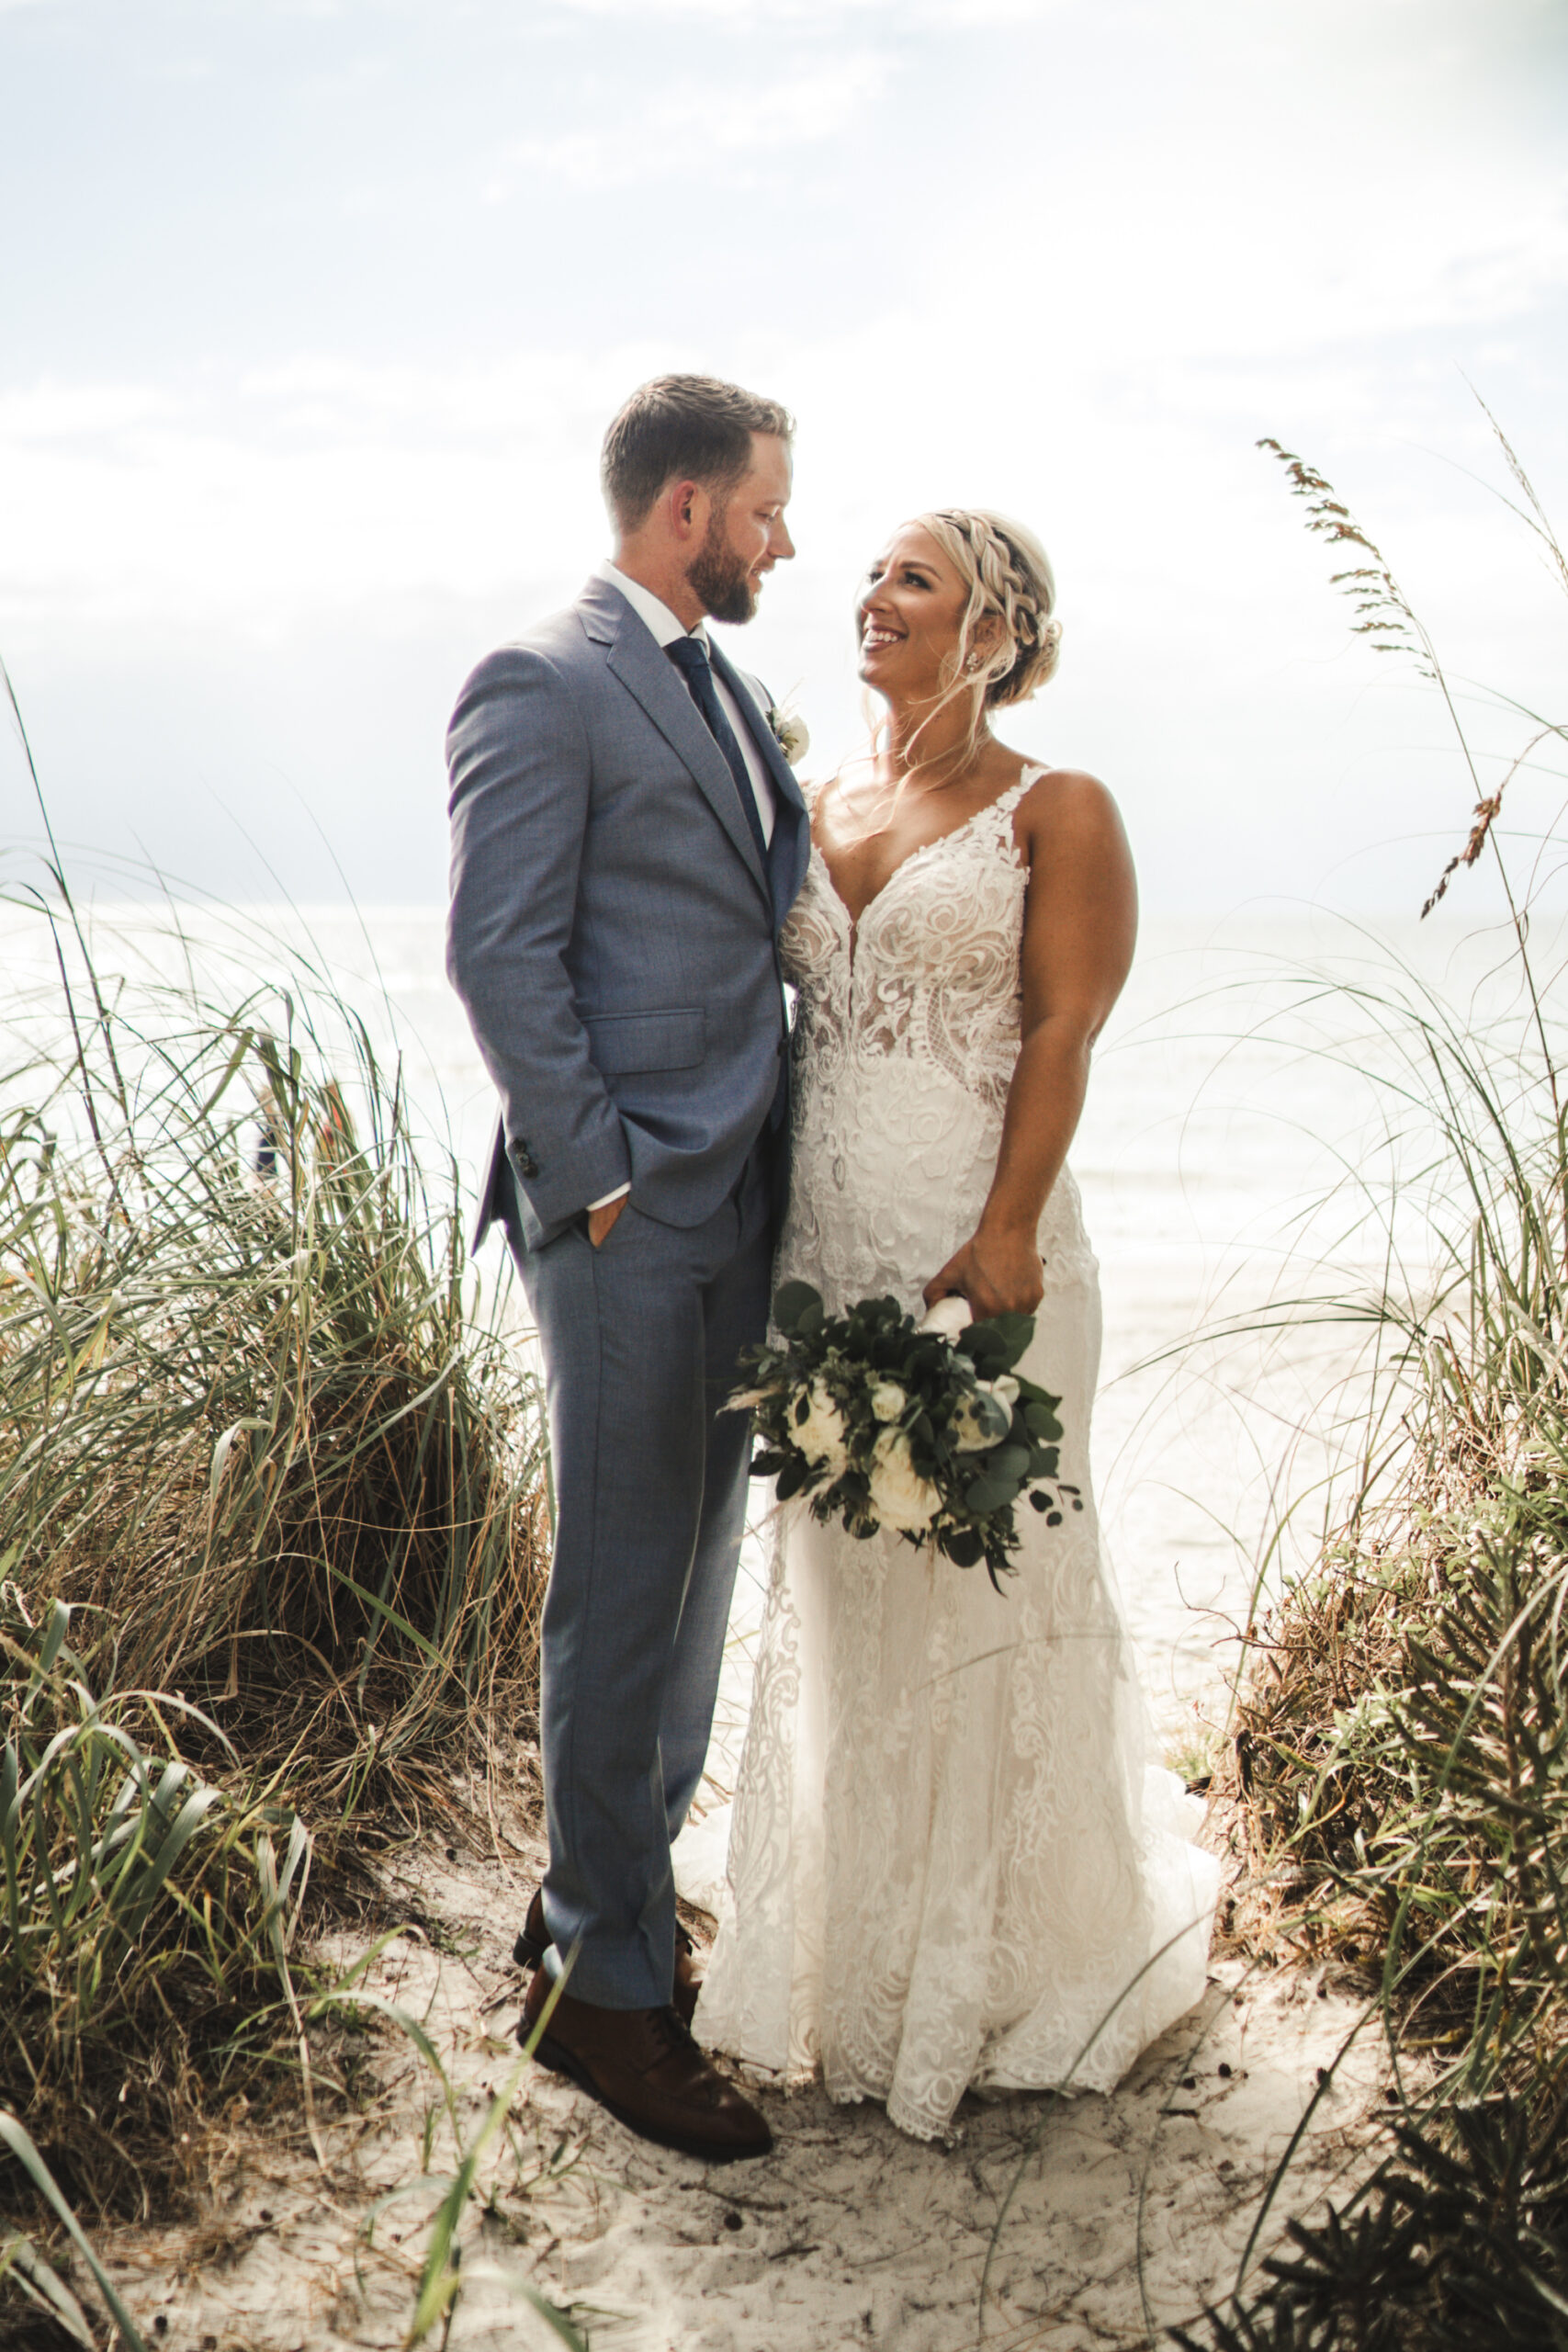 Bride and Groom Treasure Island Beach Wedding Portrait | Ivory Sheer Bodice Lace Mermaid Fit and Flare Wedding Gown Ideas | Tampa Bay Dress Boutique Truly Forever Bridal | Treasure Island Photographer Videographer J&S Media